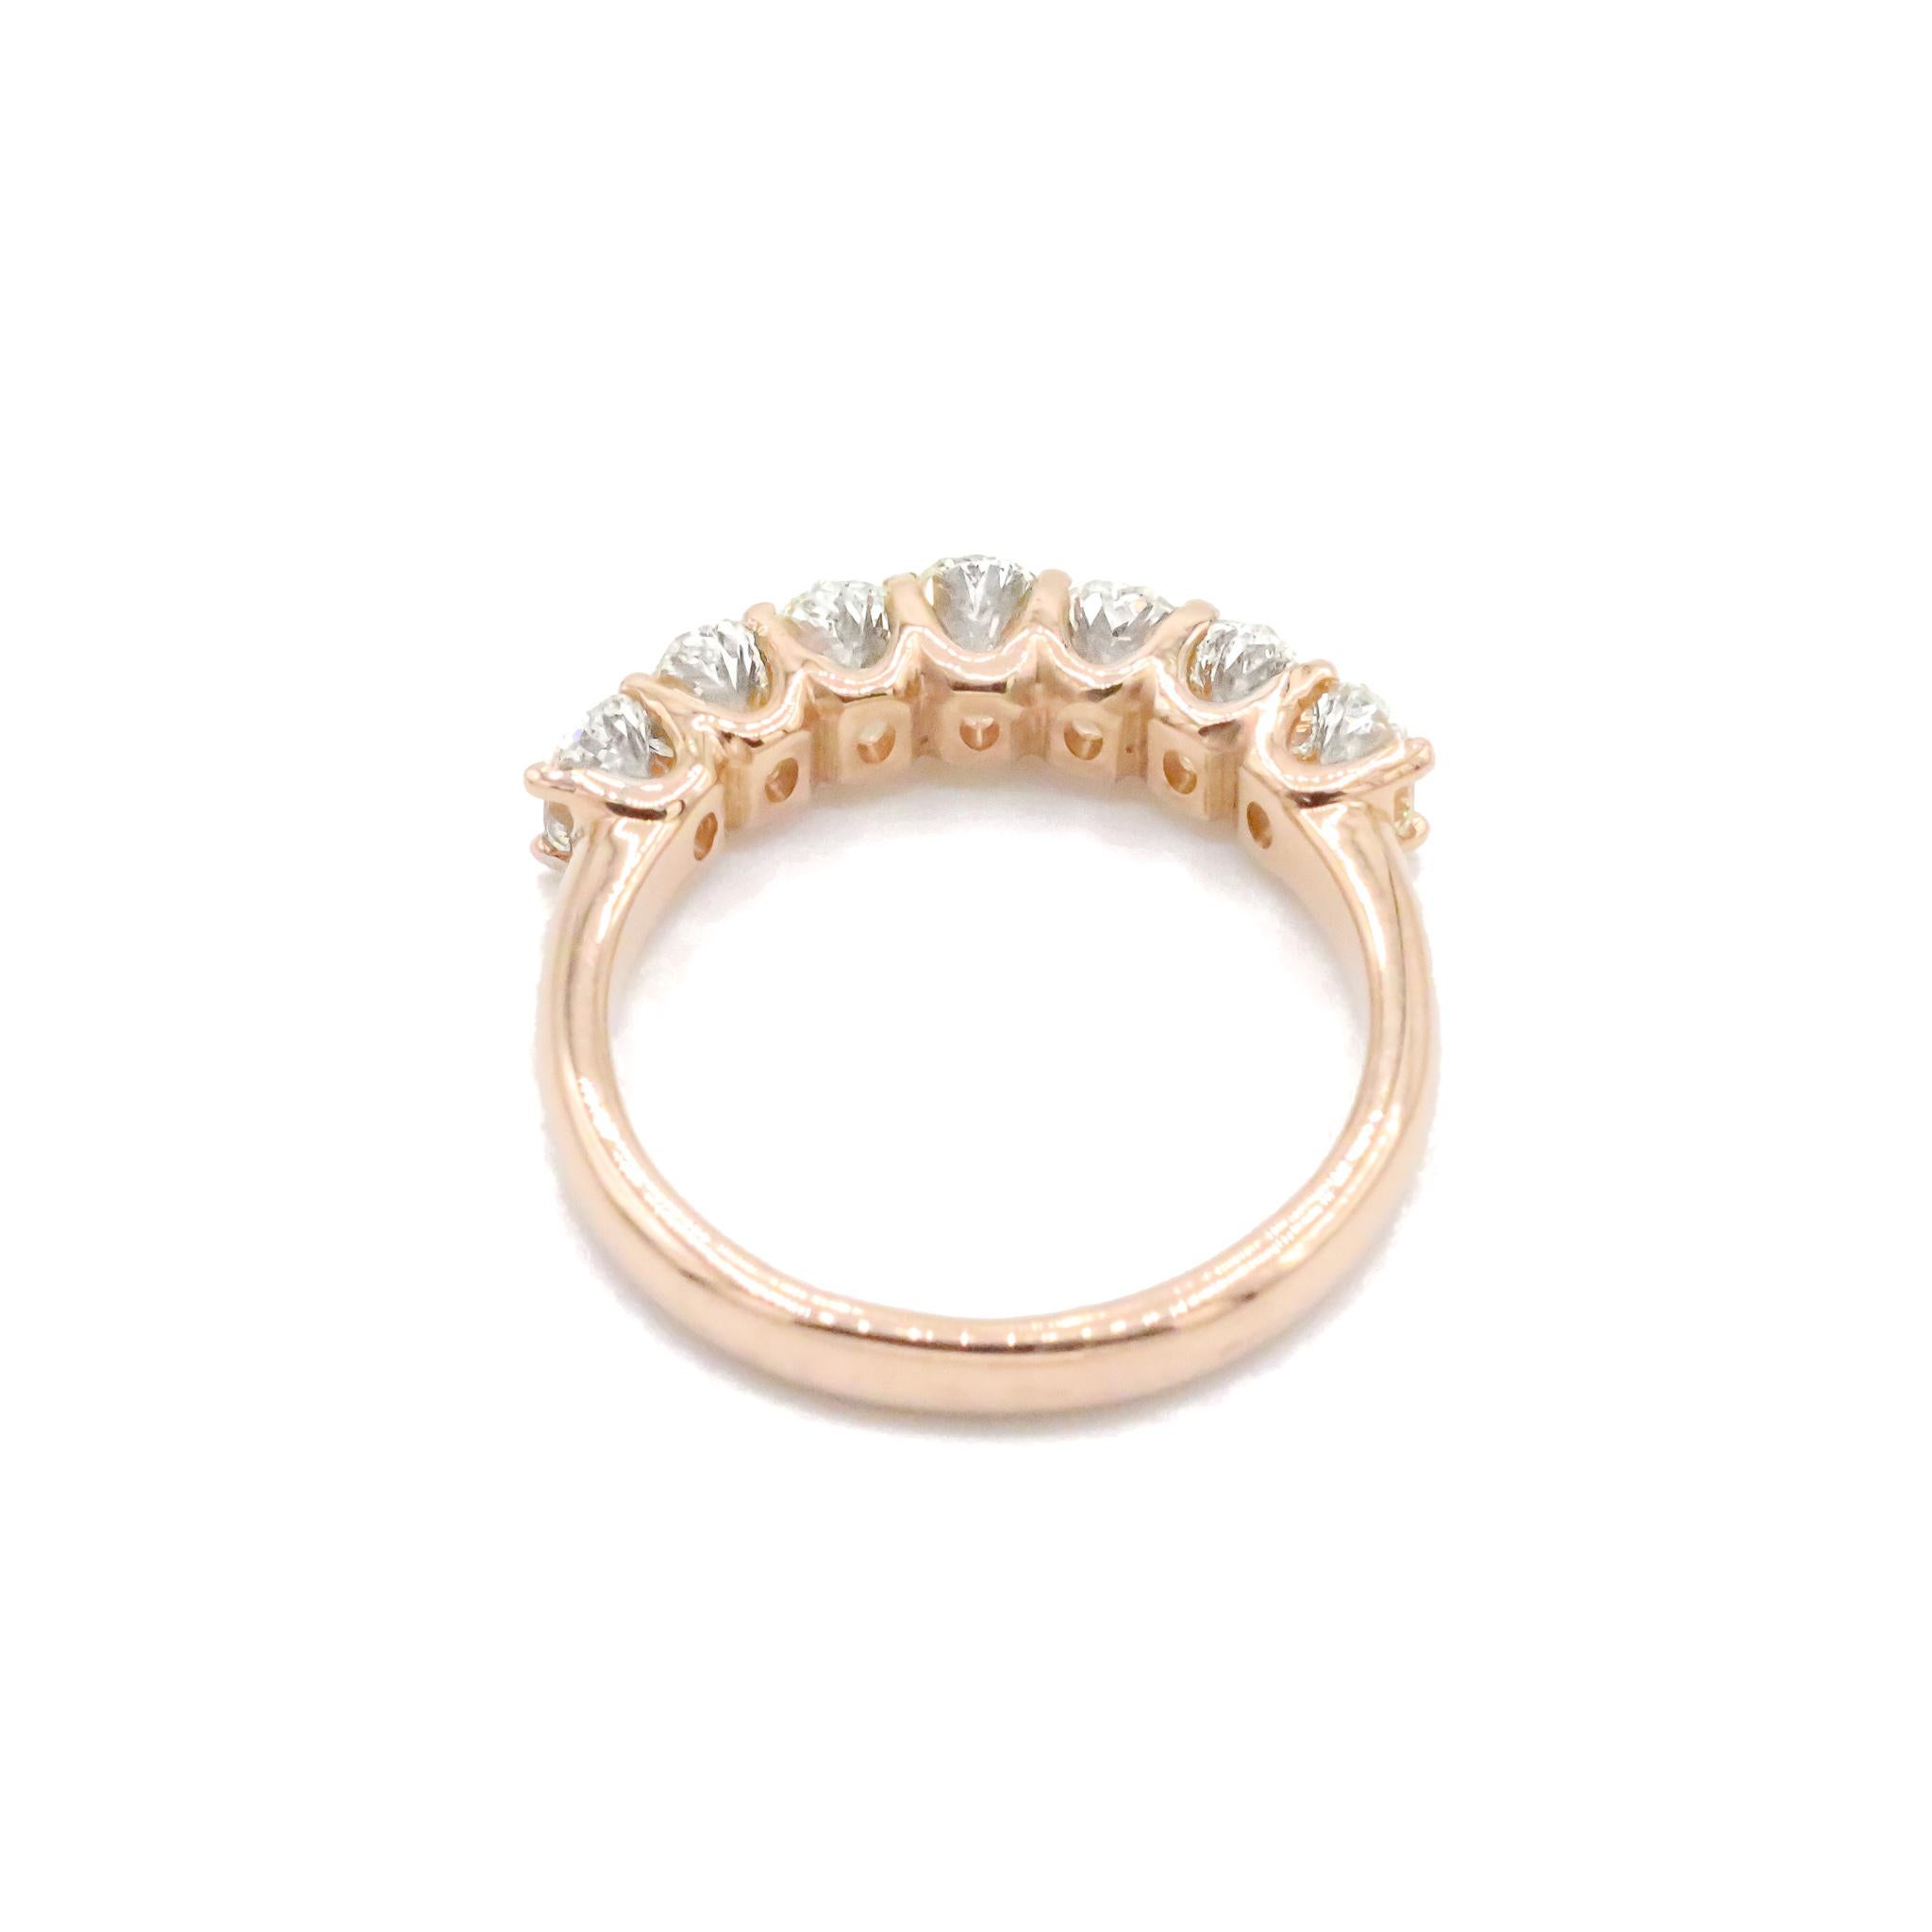 One lady's custom made polished 18K rose gold seven-across, diamond half-eternity ring with a half round shank. The ring is a size 5.5. The ring weighs a total of 4.14 grams. Stamped 